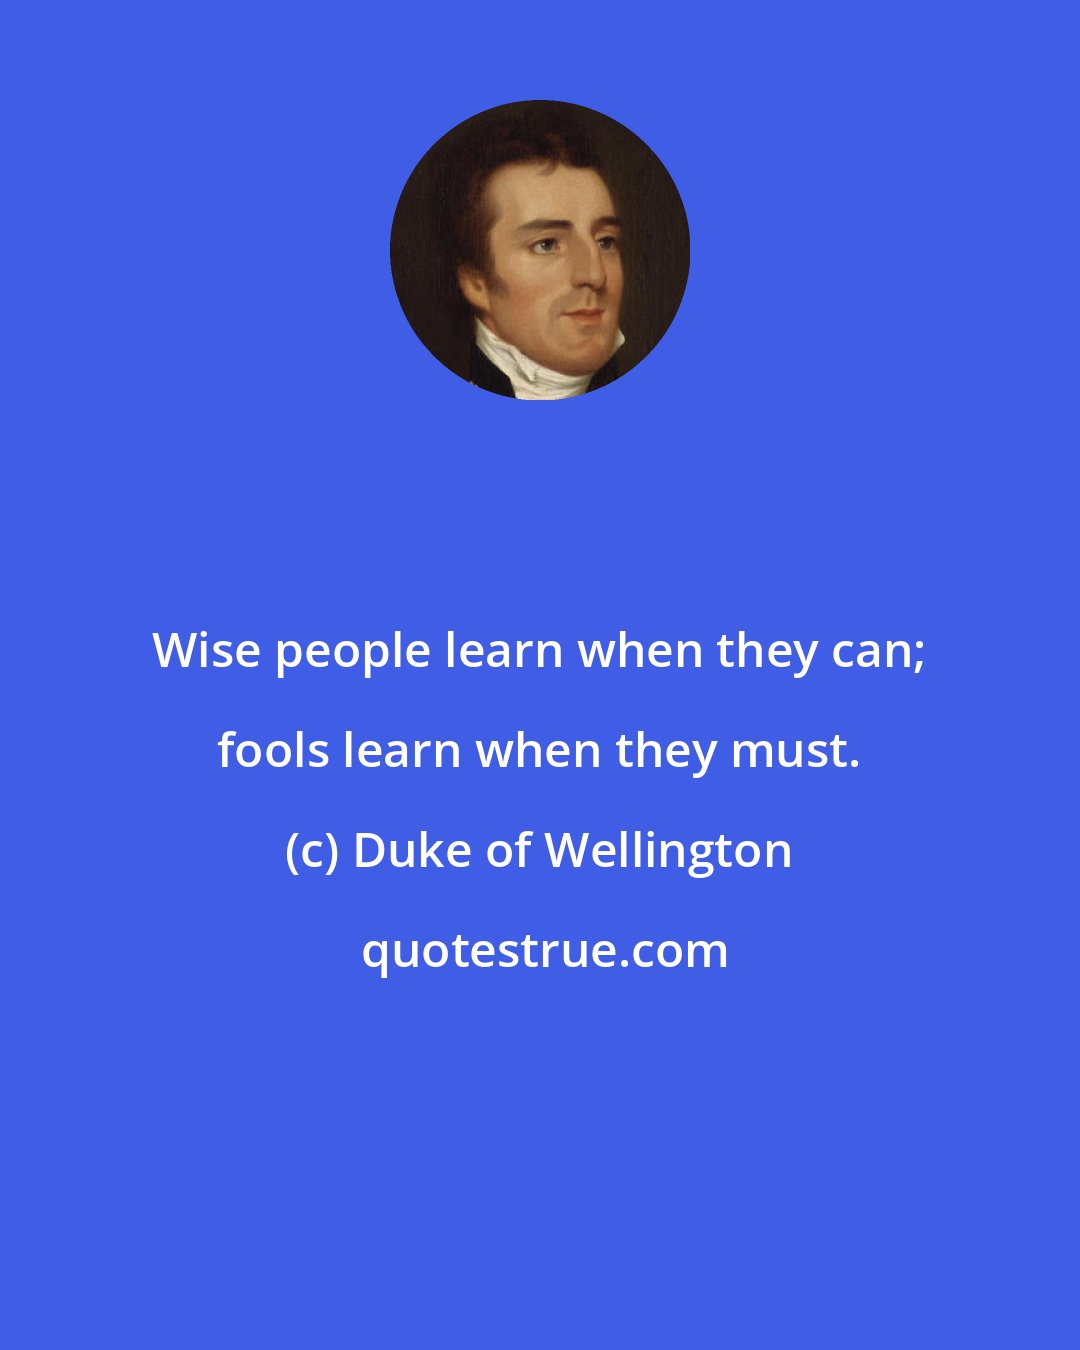 Duke of Wellington: Wise people learn when they can; fools learn when they must.